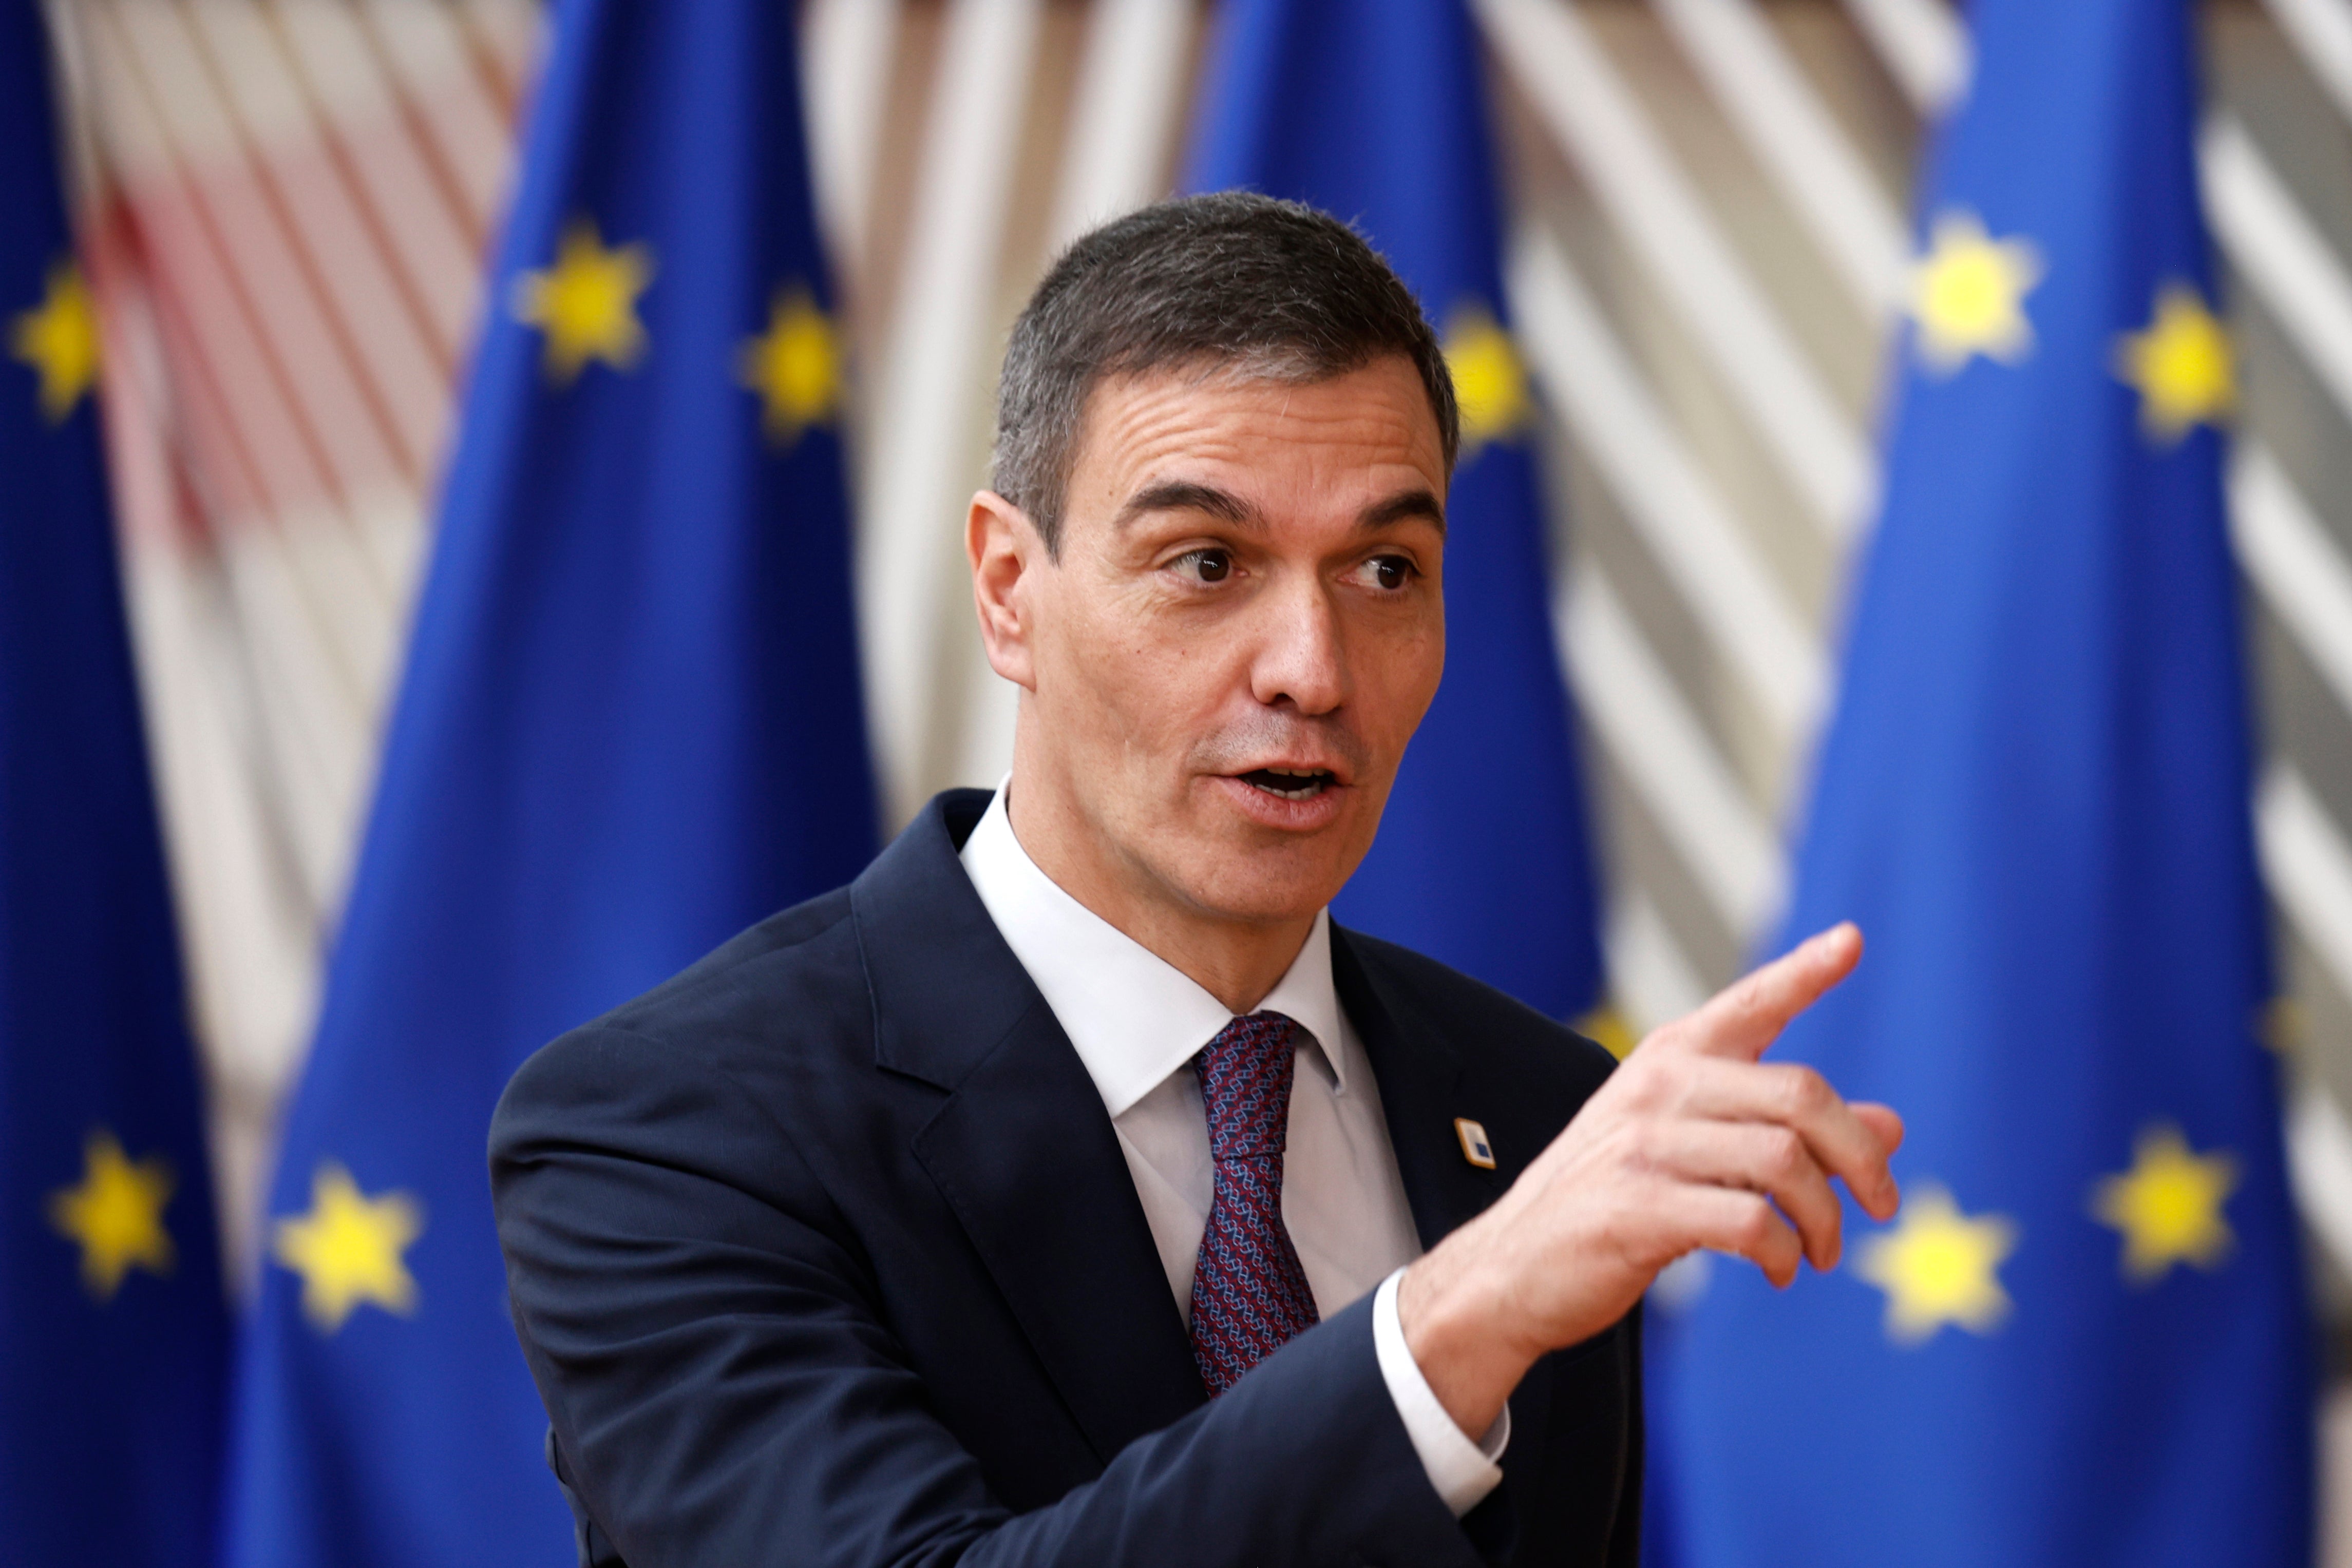 Spanish prime minister Pedro Sanchez said the move would ensure ‘peace, justice and democracy’ throughout the region